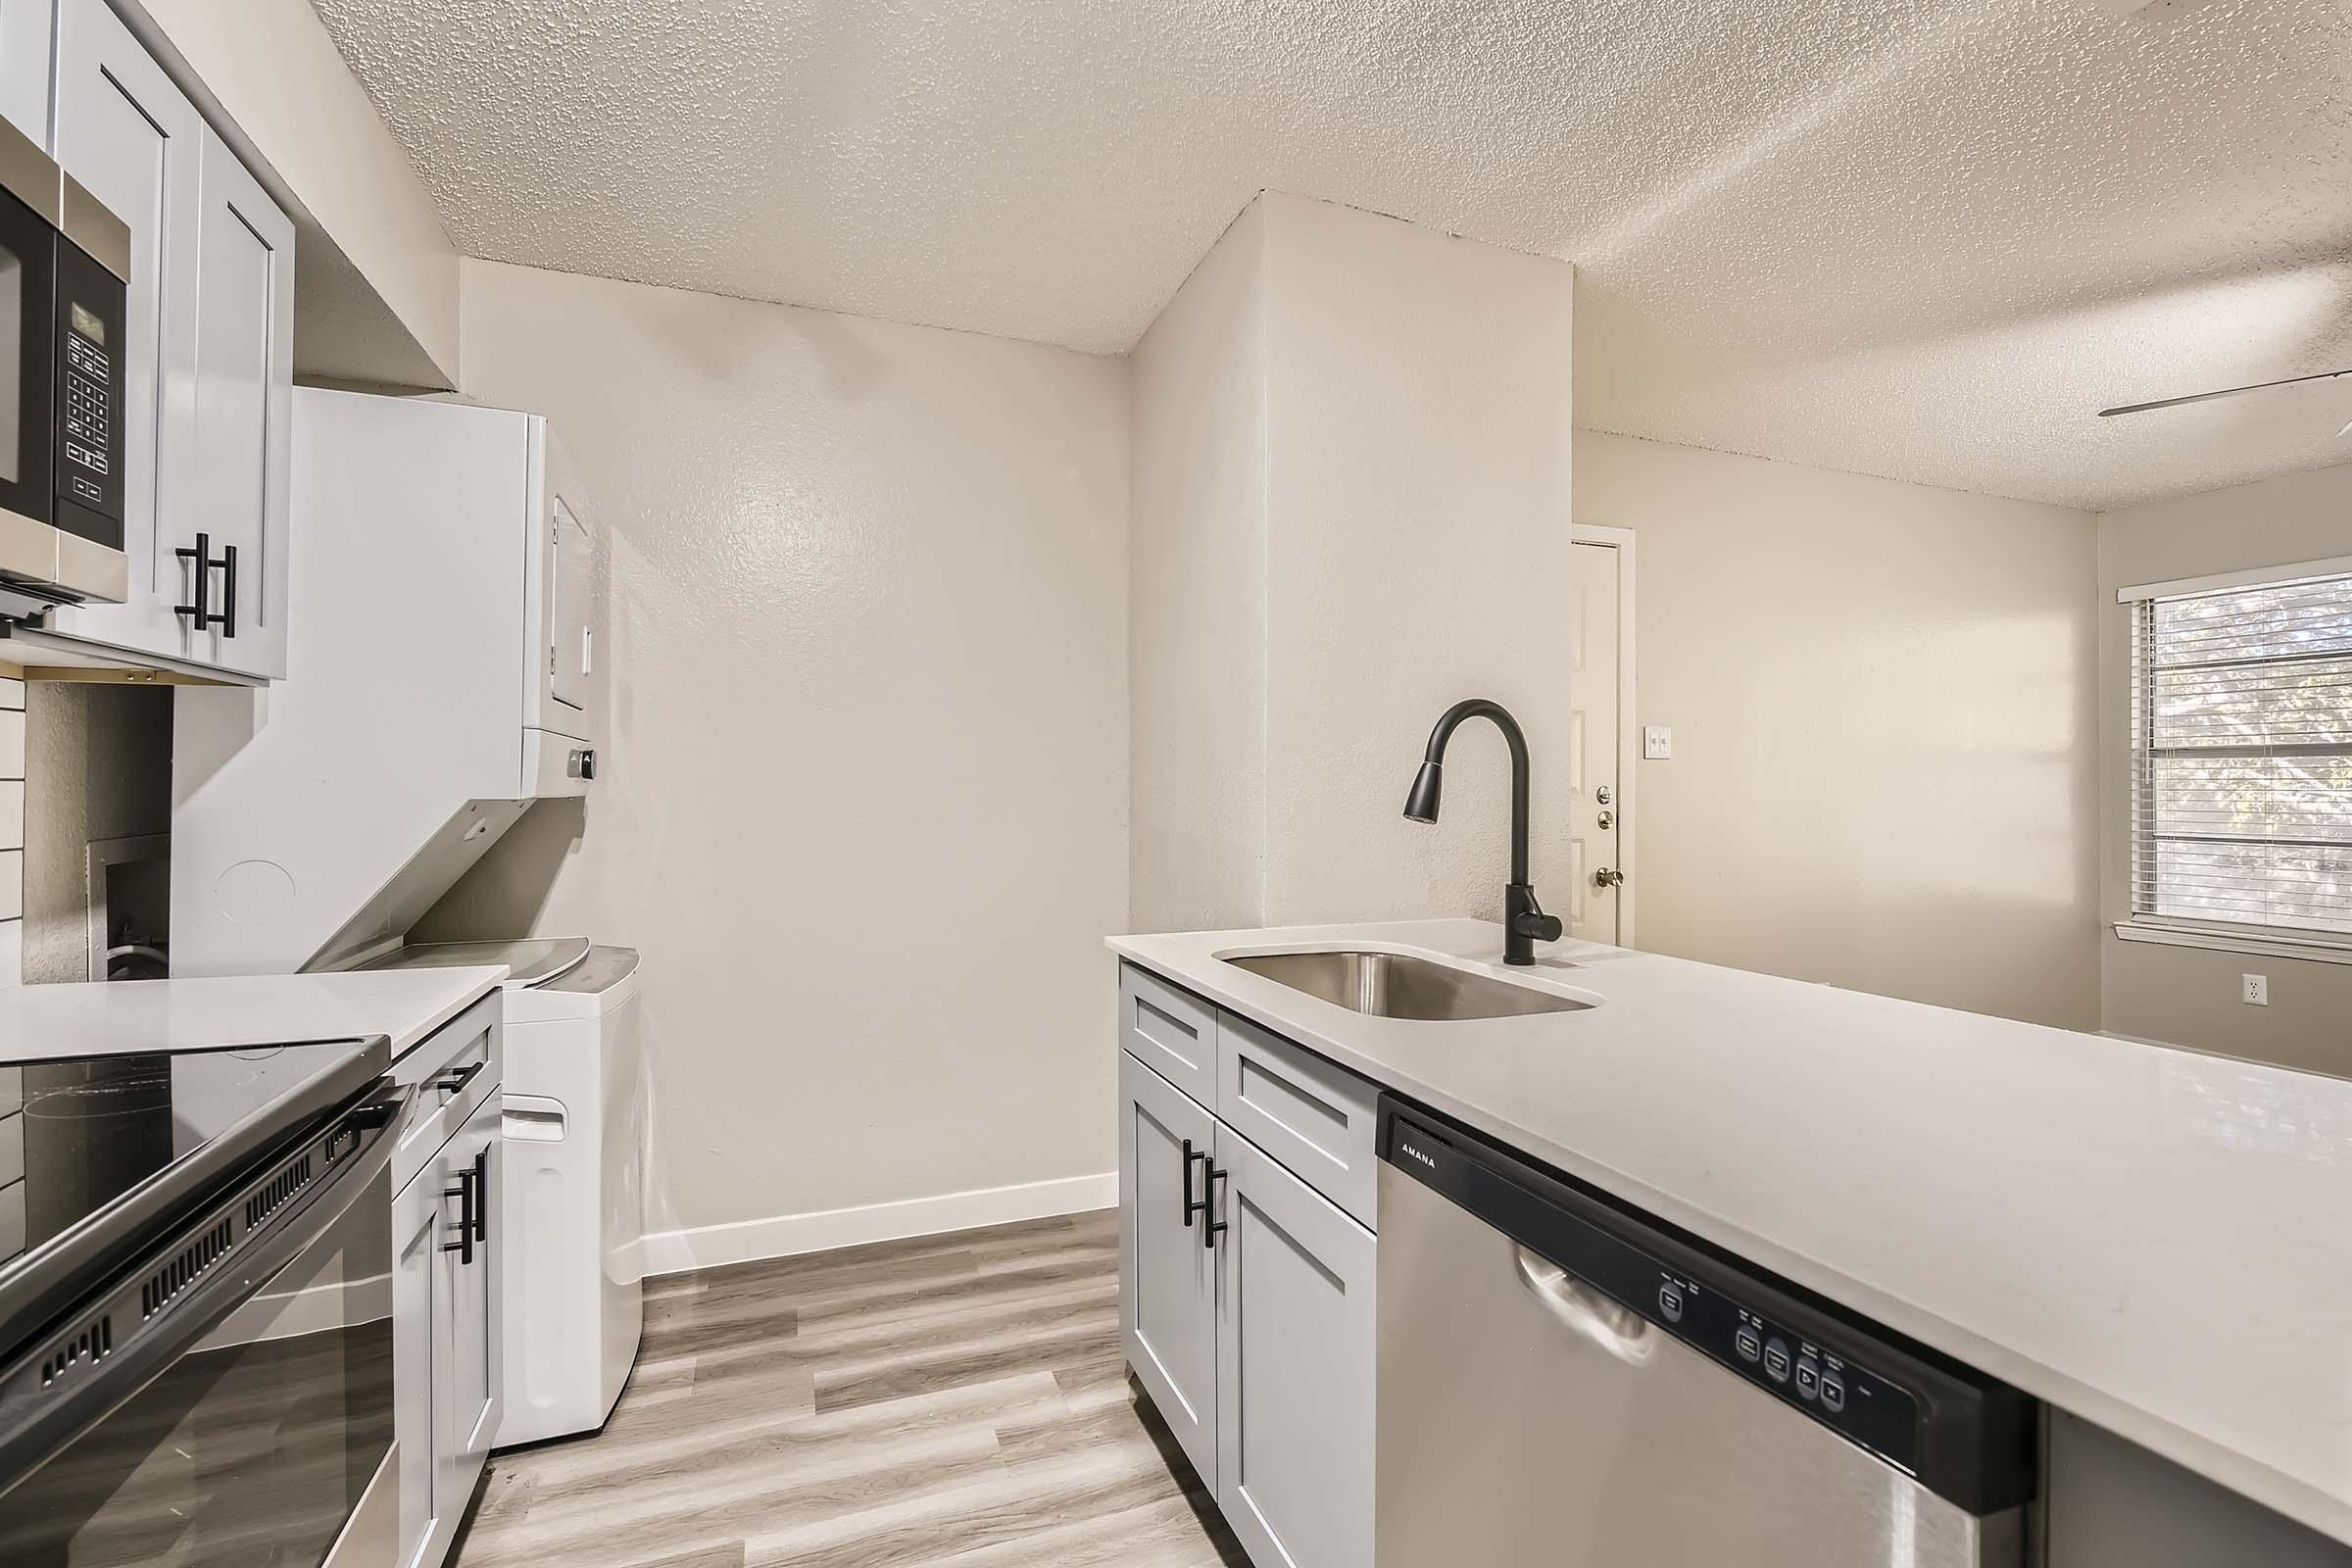 Rise Bedford Lake apartment kitchen with stove, microwave, sink, dishwasher, and washer/dryer